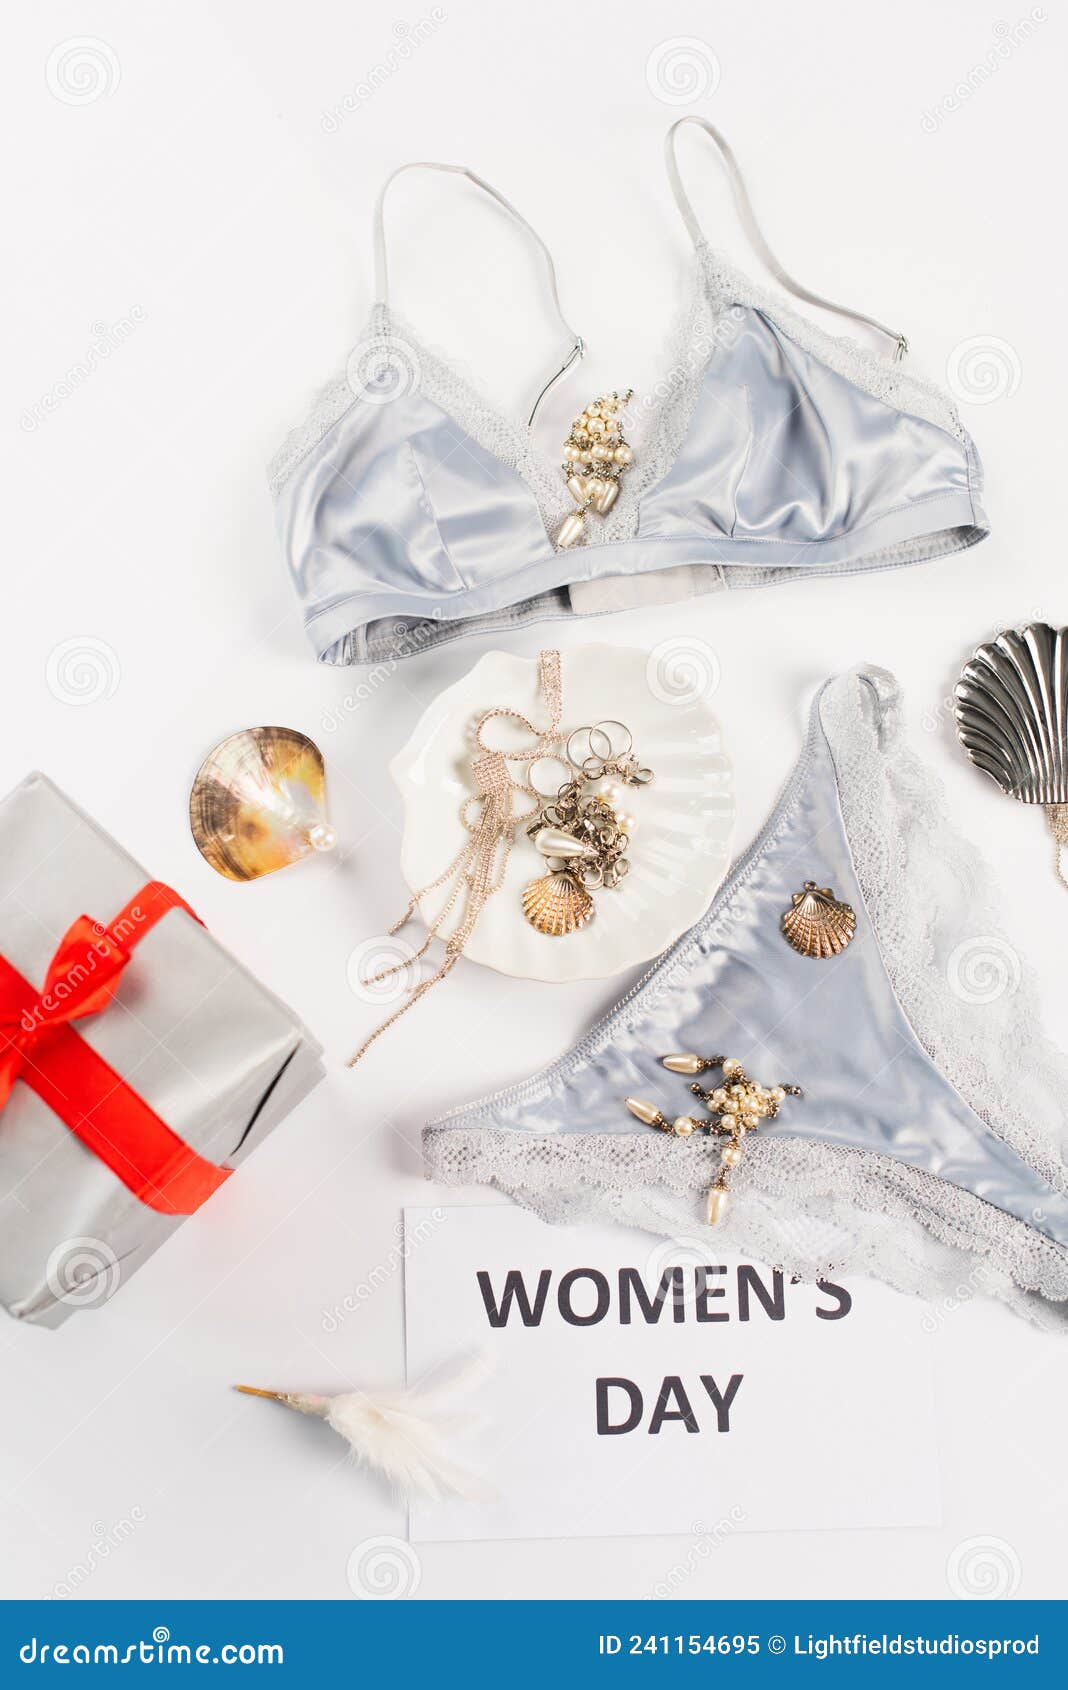 Top View of Gift Near Lingerie Stock Image - Image of ribbon, white:  241154695